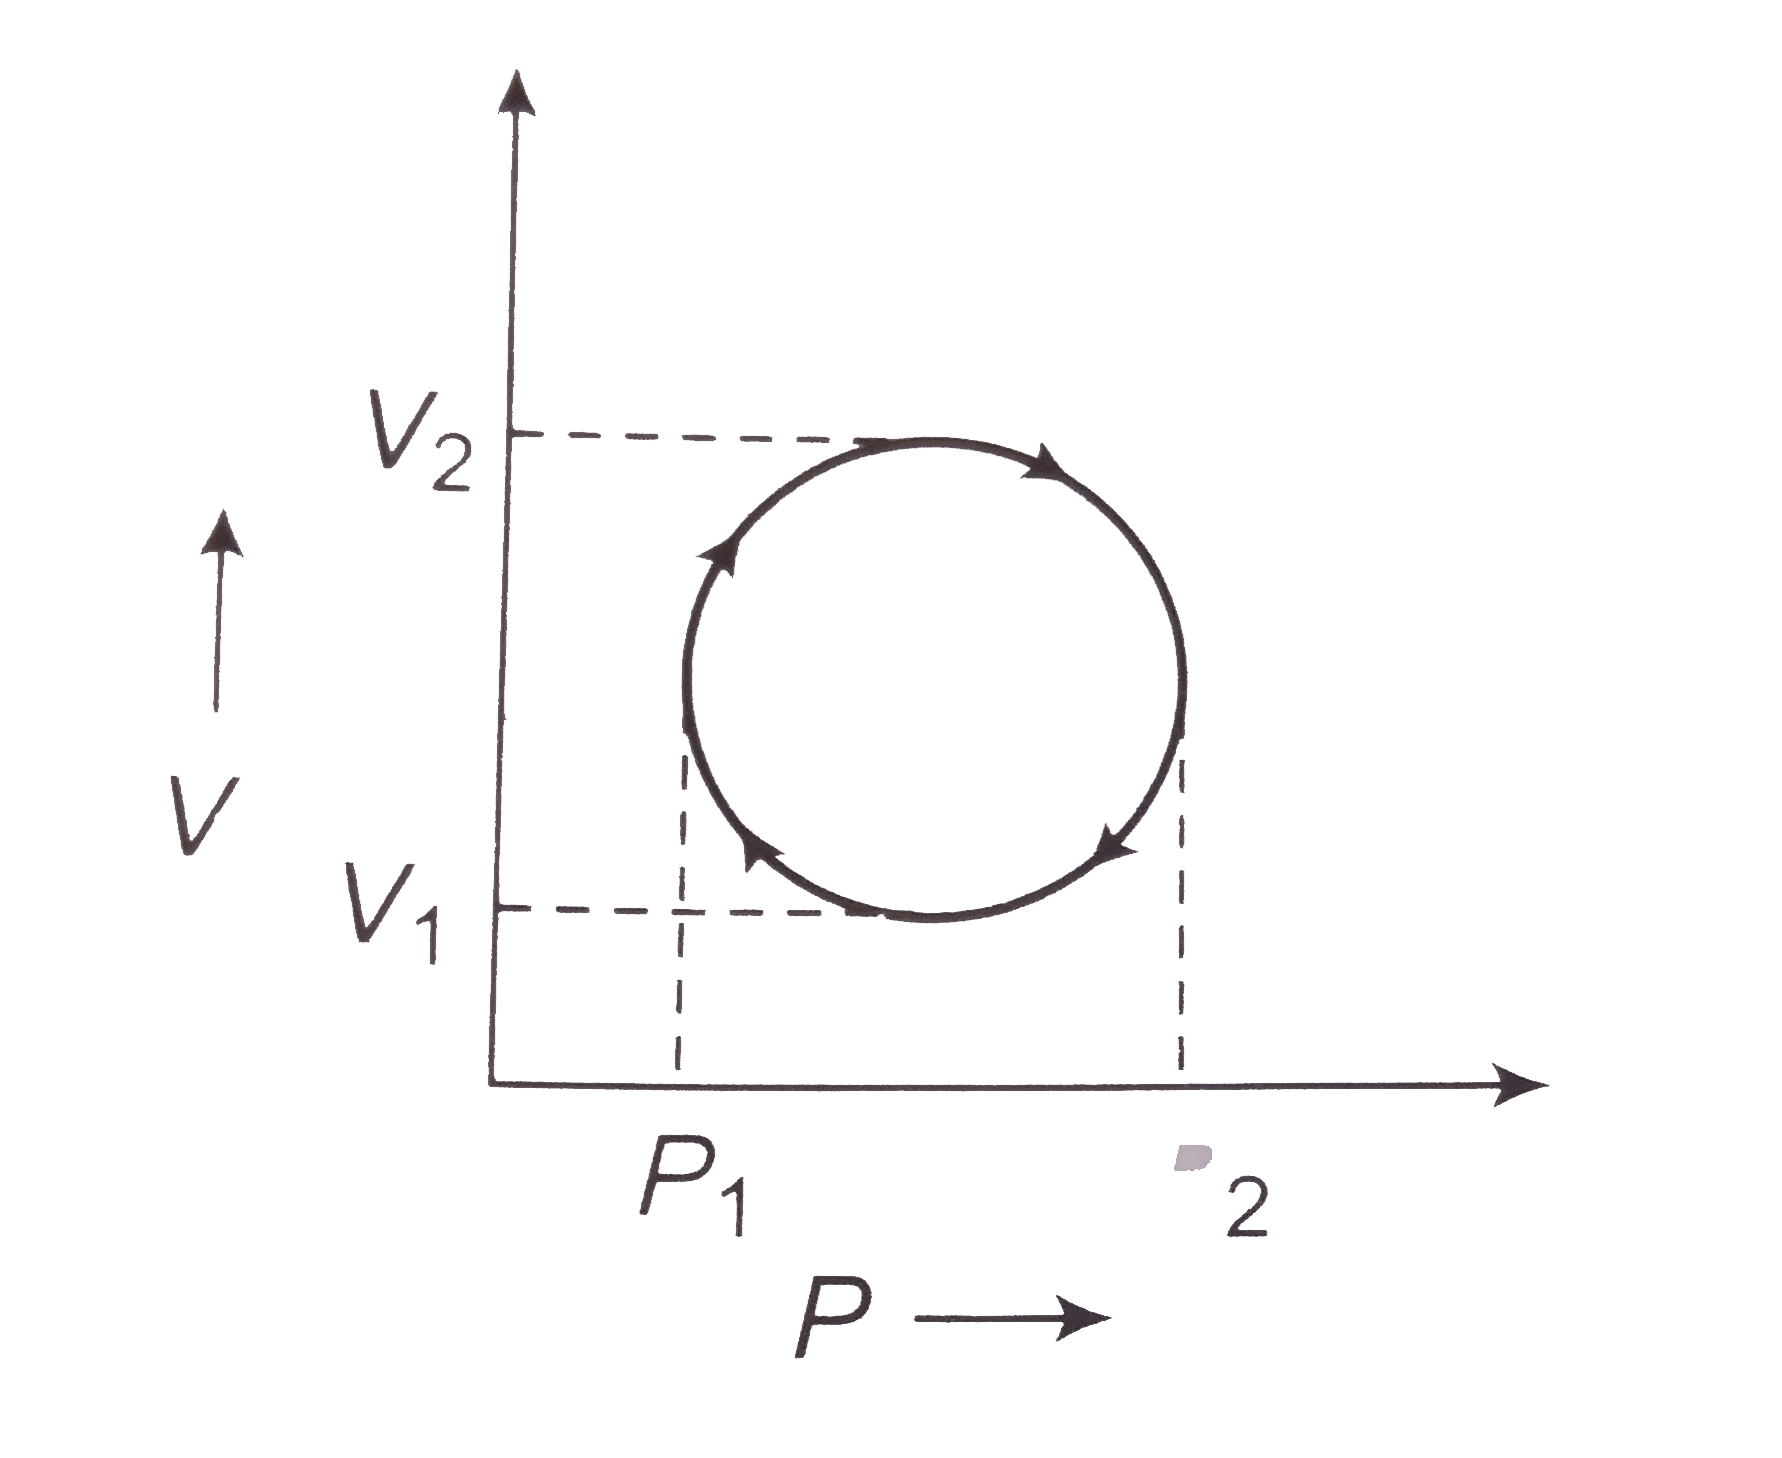 In the cyclic process shown in the V-P diagram the magnitude of the work is done is